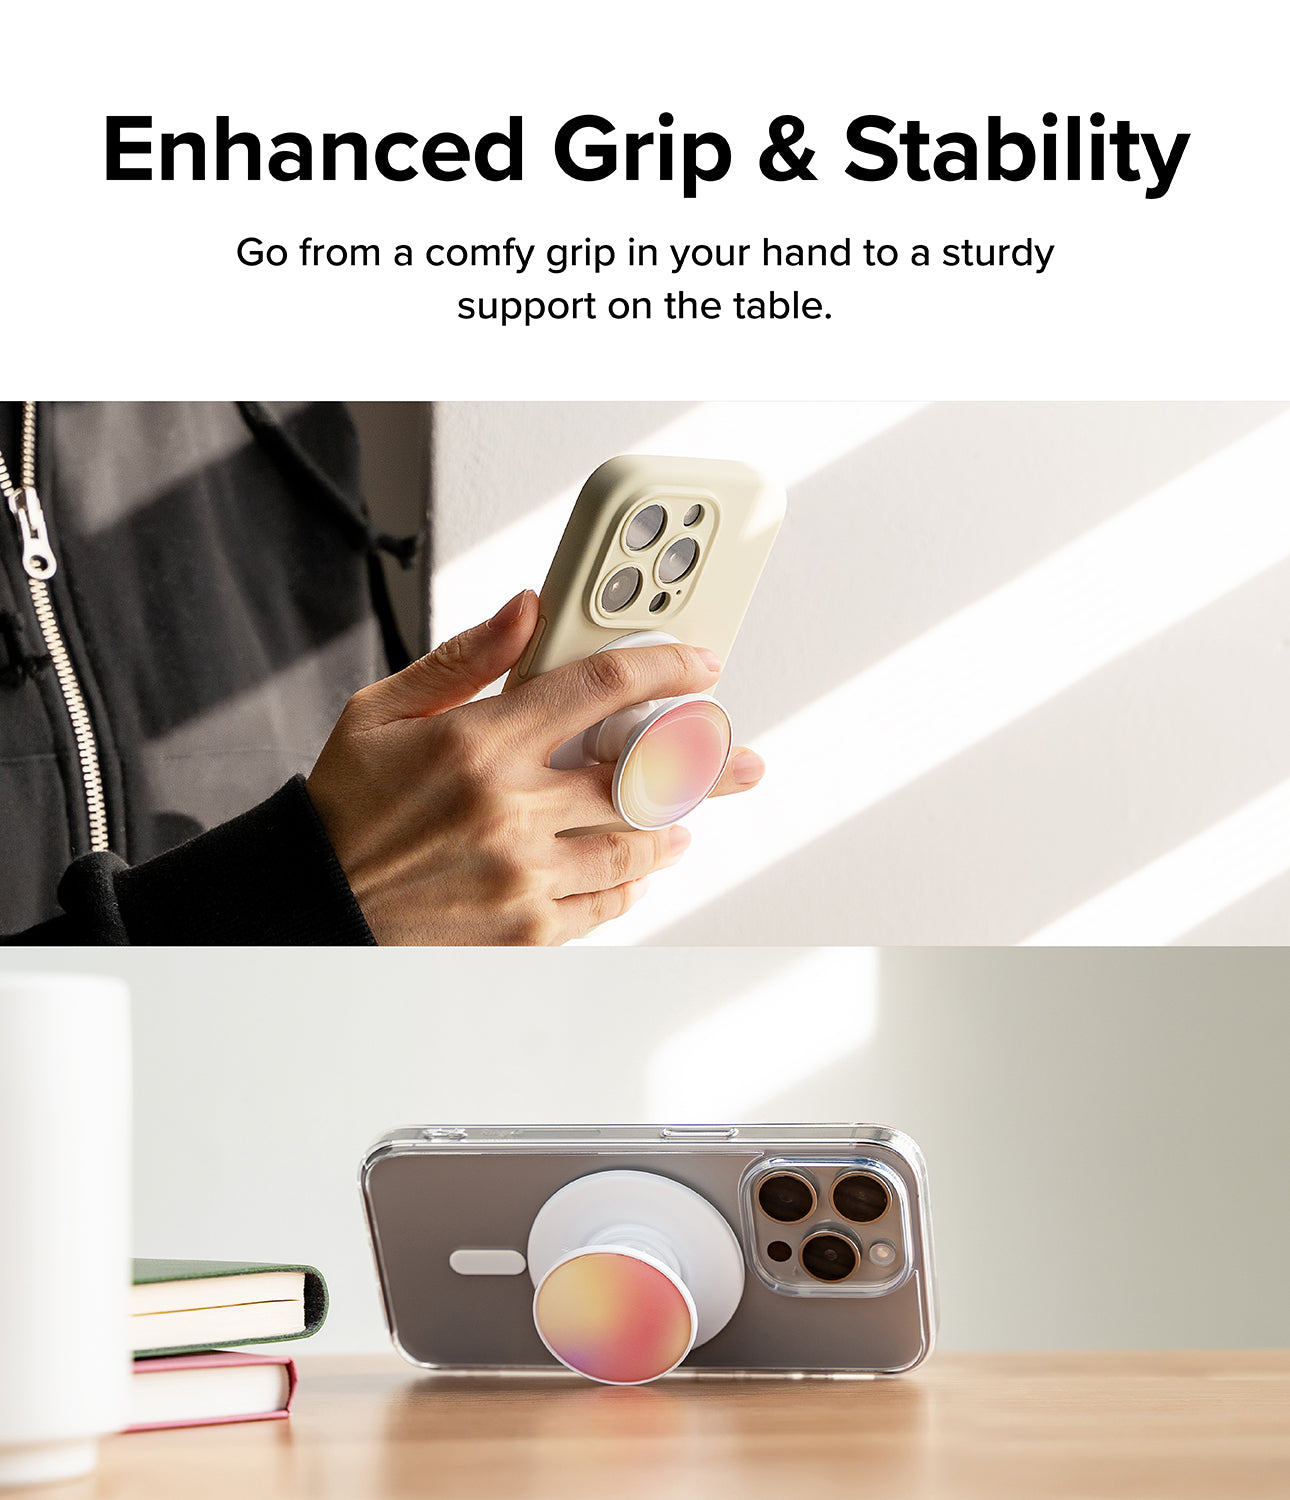 Ringke Glossy Tok Magnetic - Enhanced Grip and Stability. Go from a comfy grip in your hand to a sturdy support on the table.